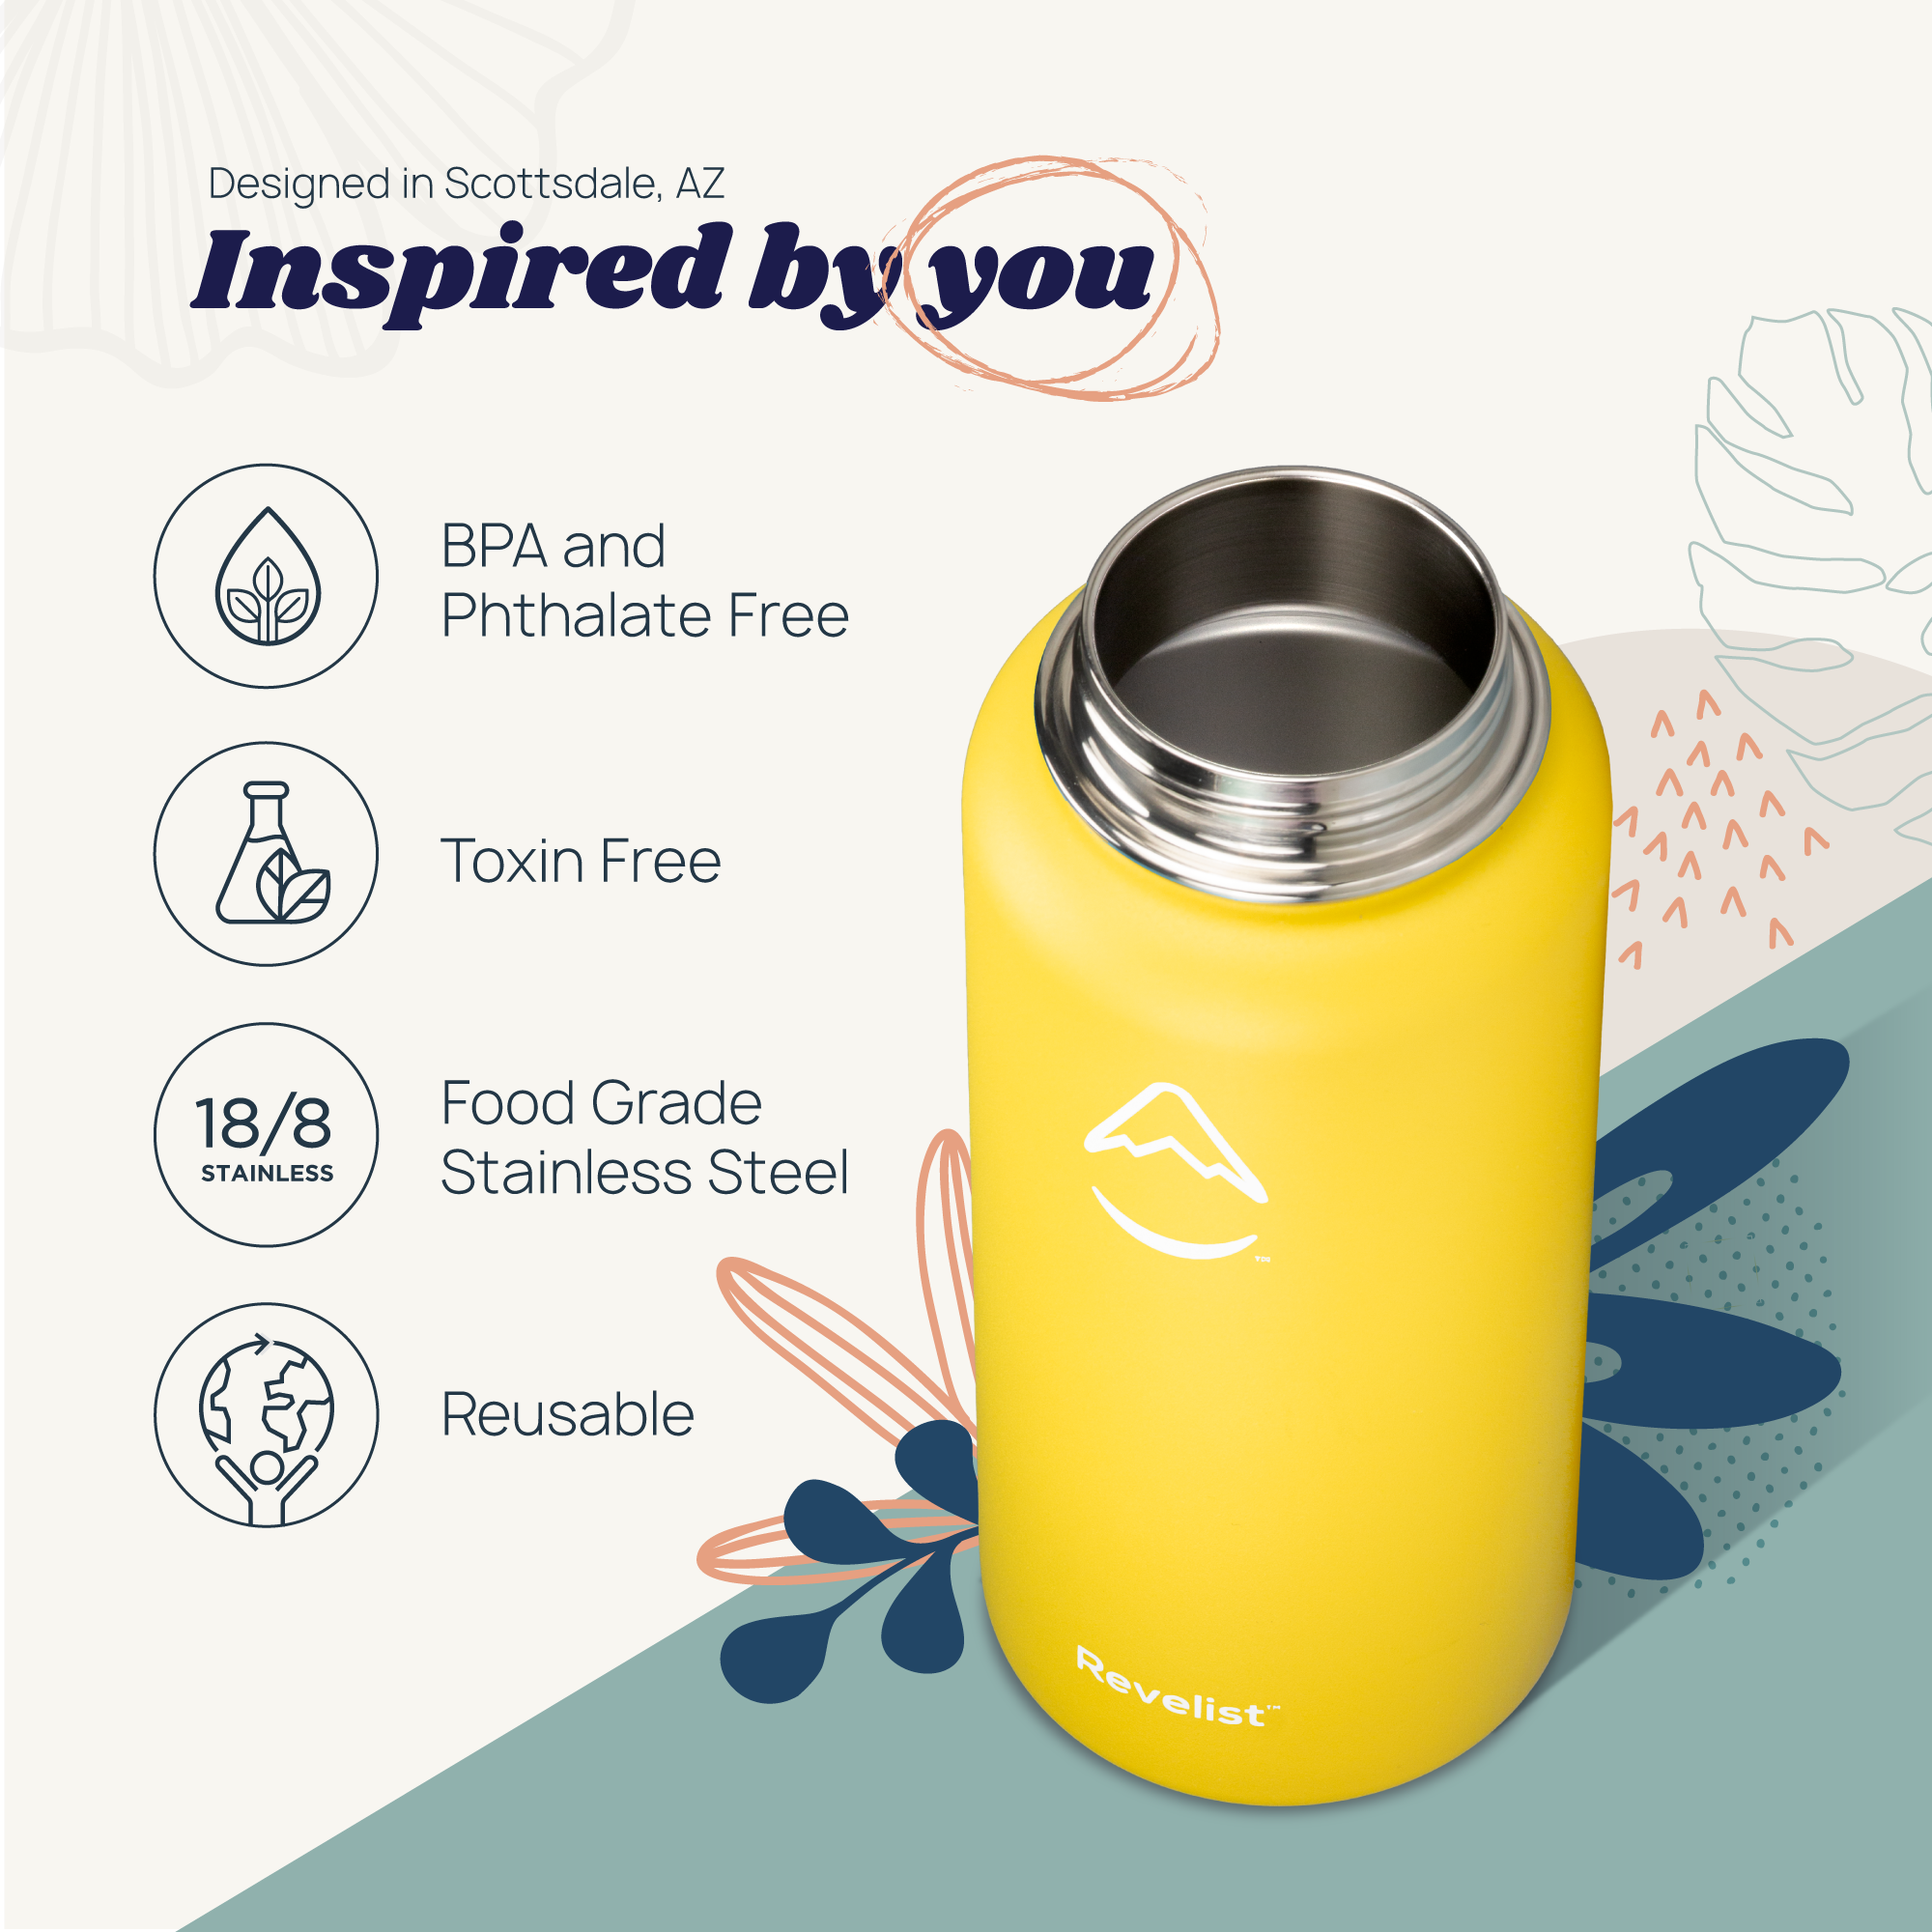 Revelist 32oz Insulated Water Bottle with Straw, Spout, and Stainless Steel Screw Top Lids - Sunburst Yellow